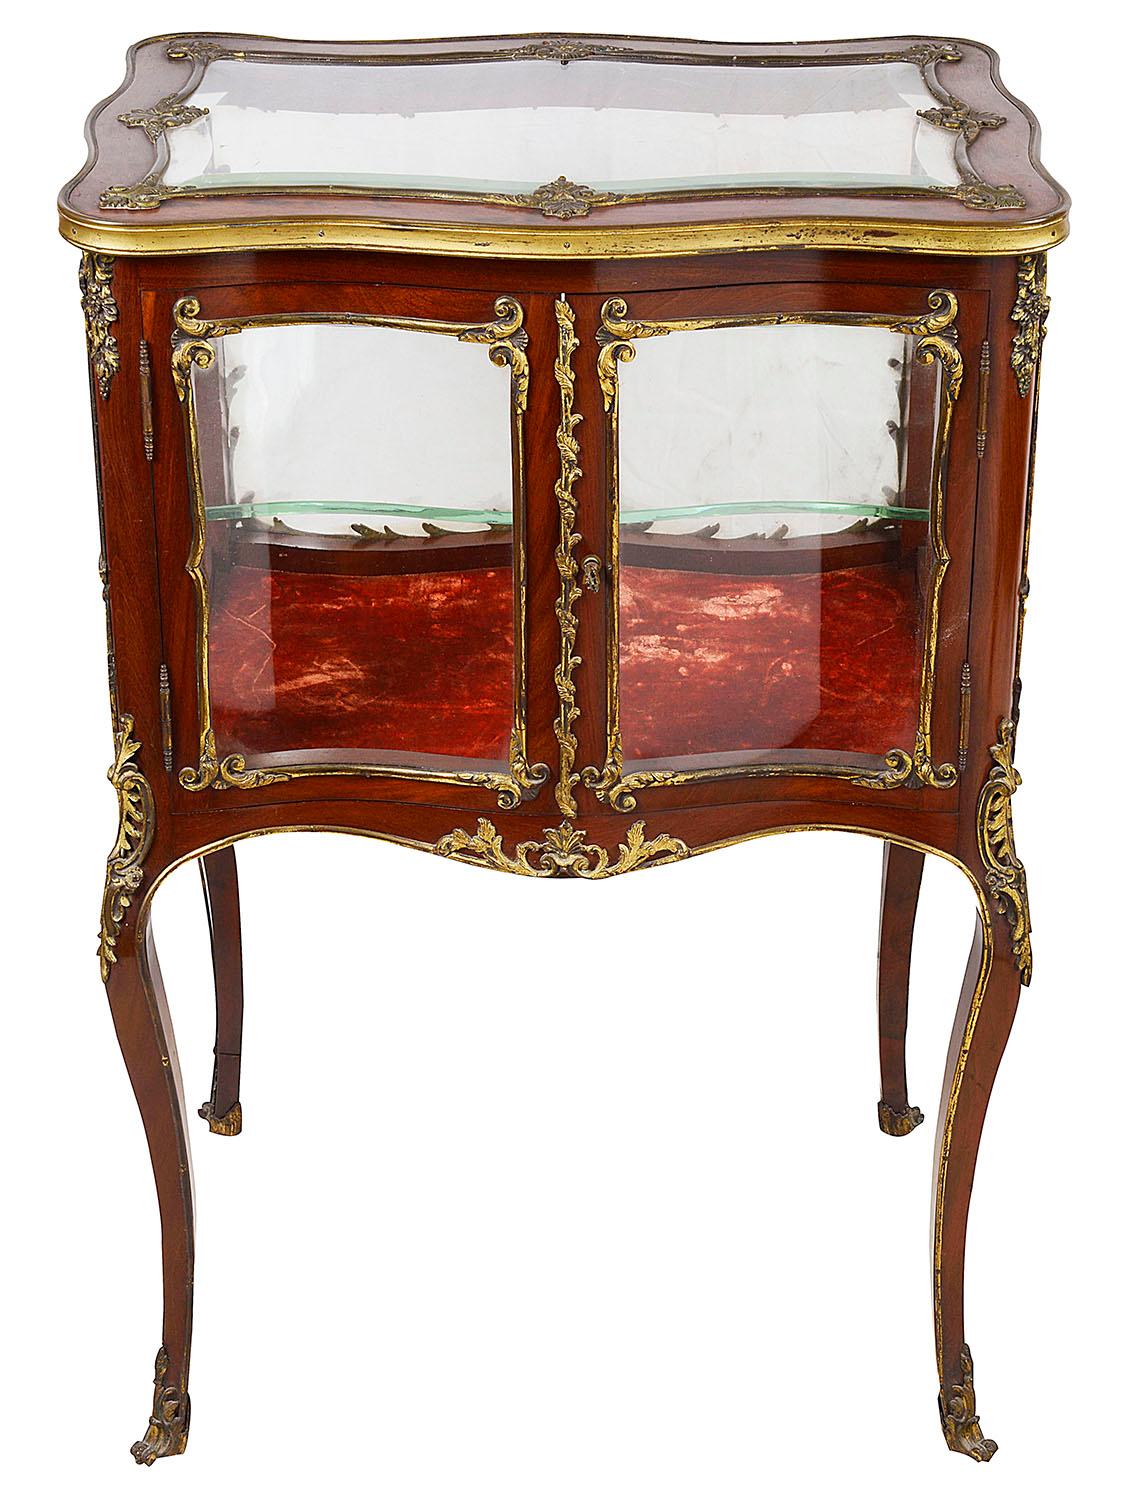 A good quality late 19th century French mahogany free standing bijouterie cabinet. having scrolling rococo, Louis XVI style gilded ormolu mounts, a single door opening to access the glass shelf within. Raised on elegant cabriole legs and terminating